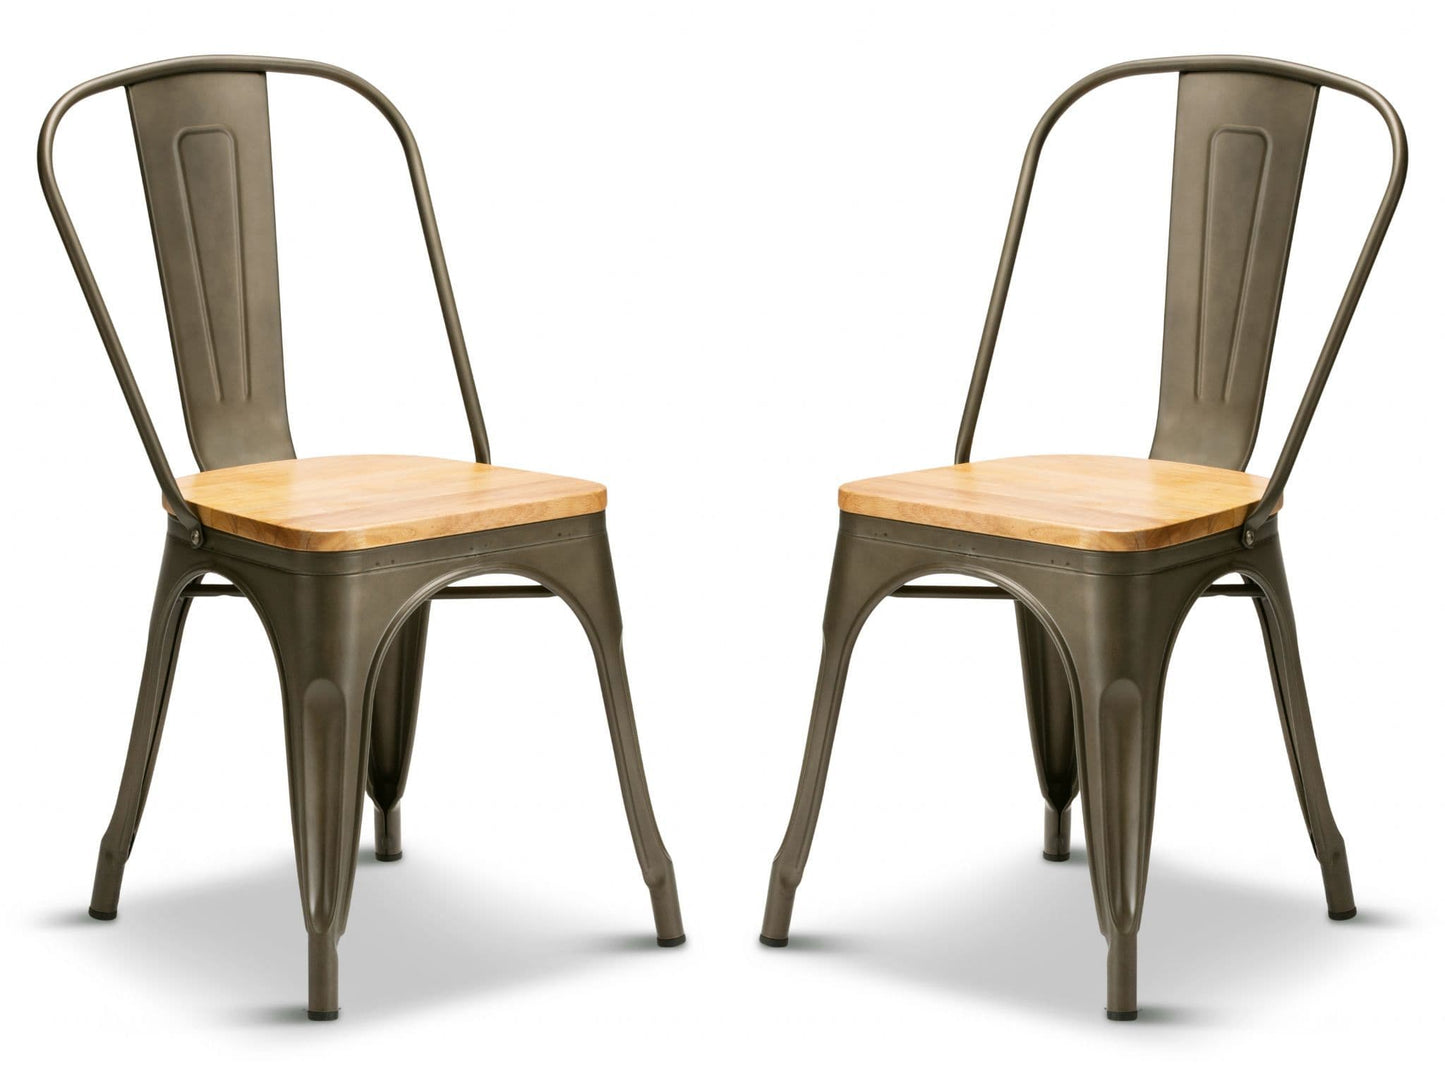 2 Gun Metal With Oak Seat Industrial Tolix Style Dining Chairs